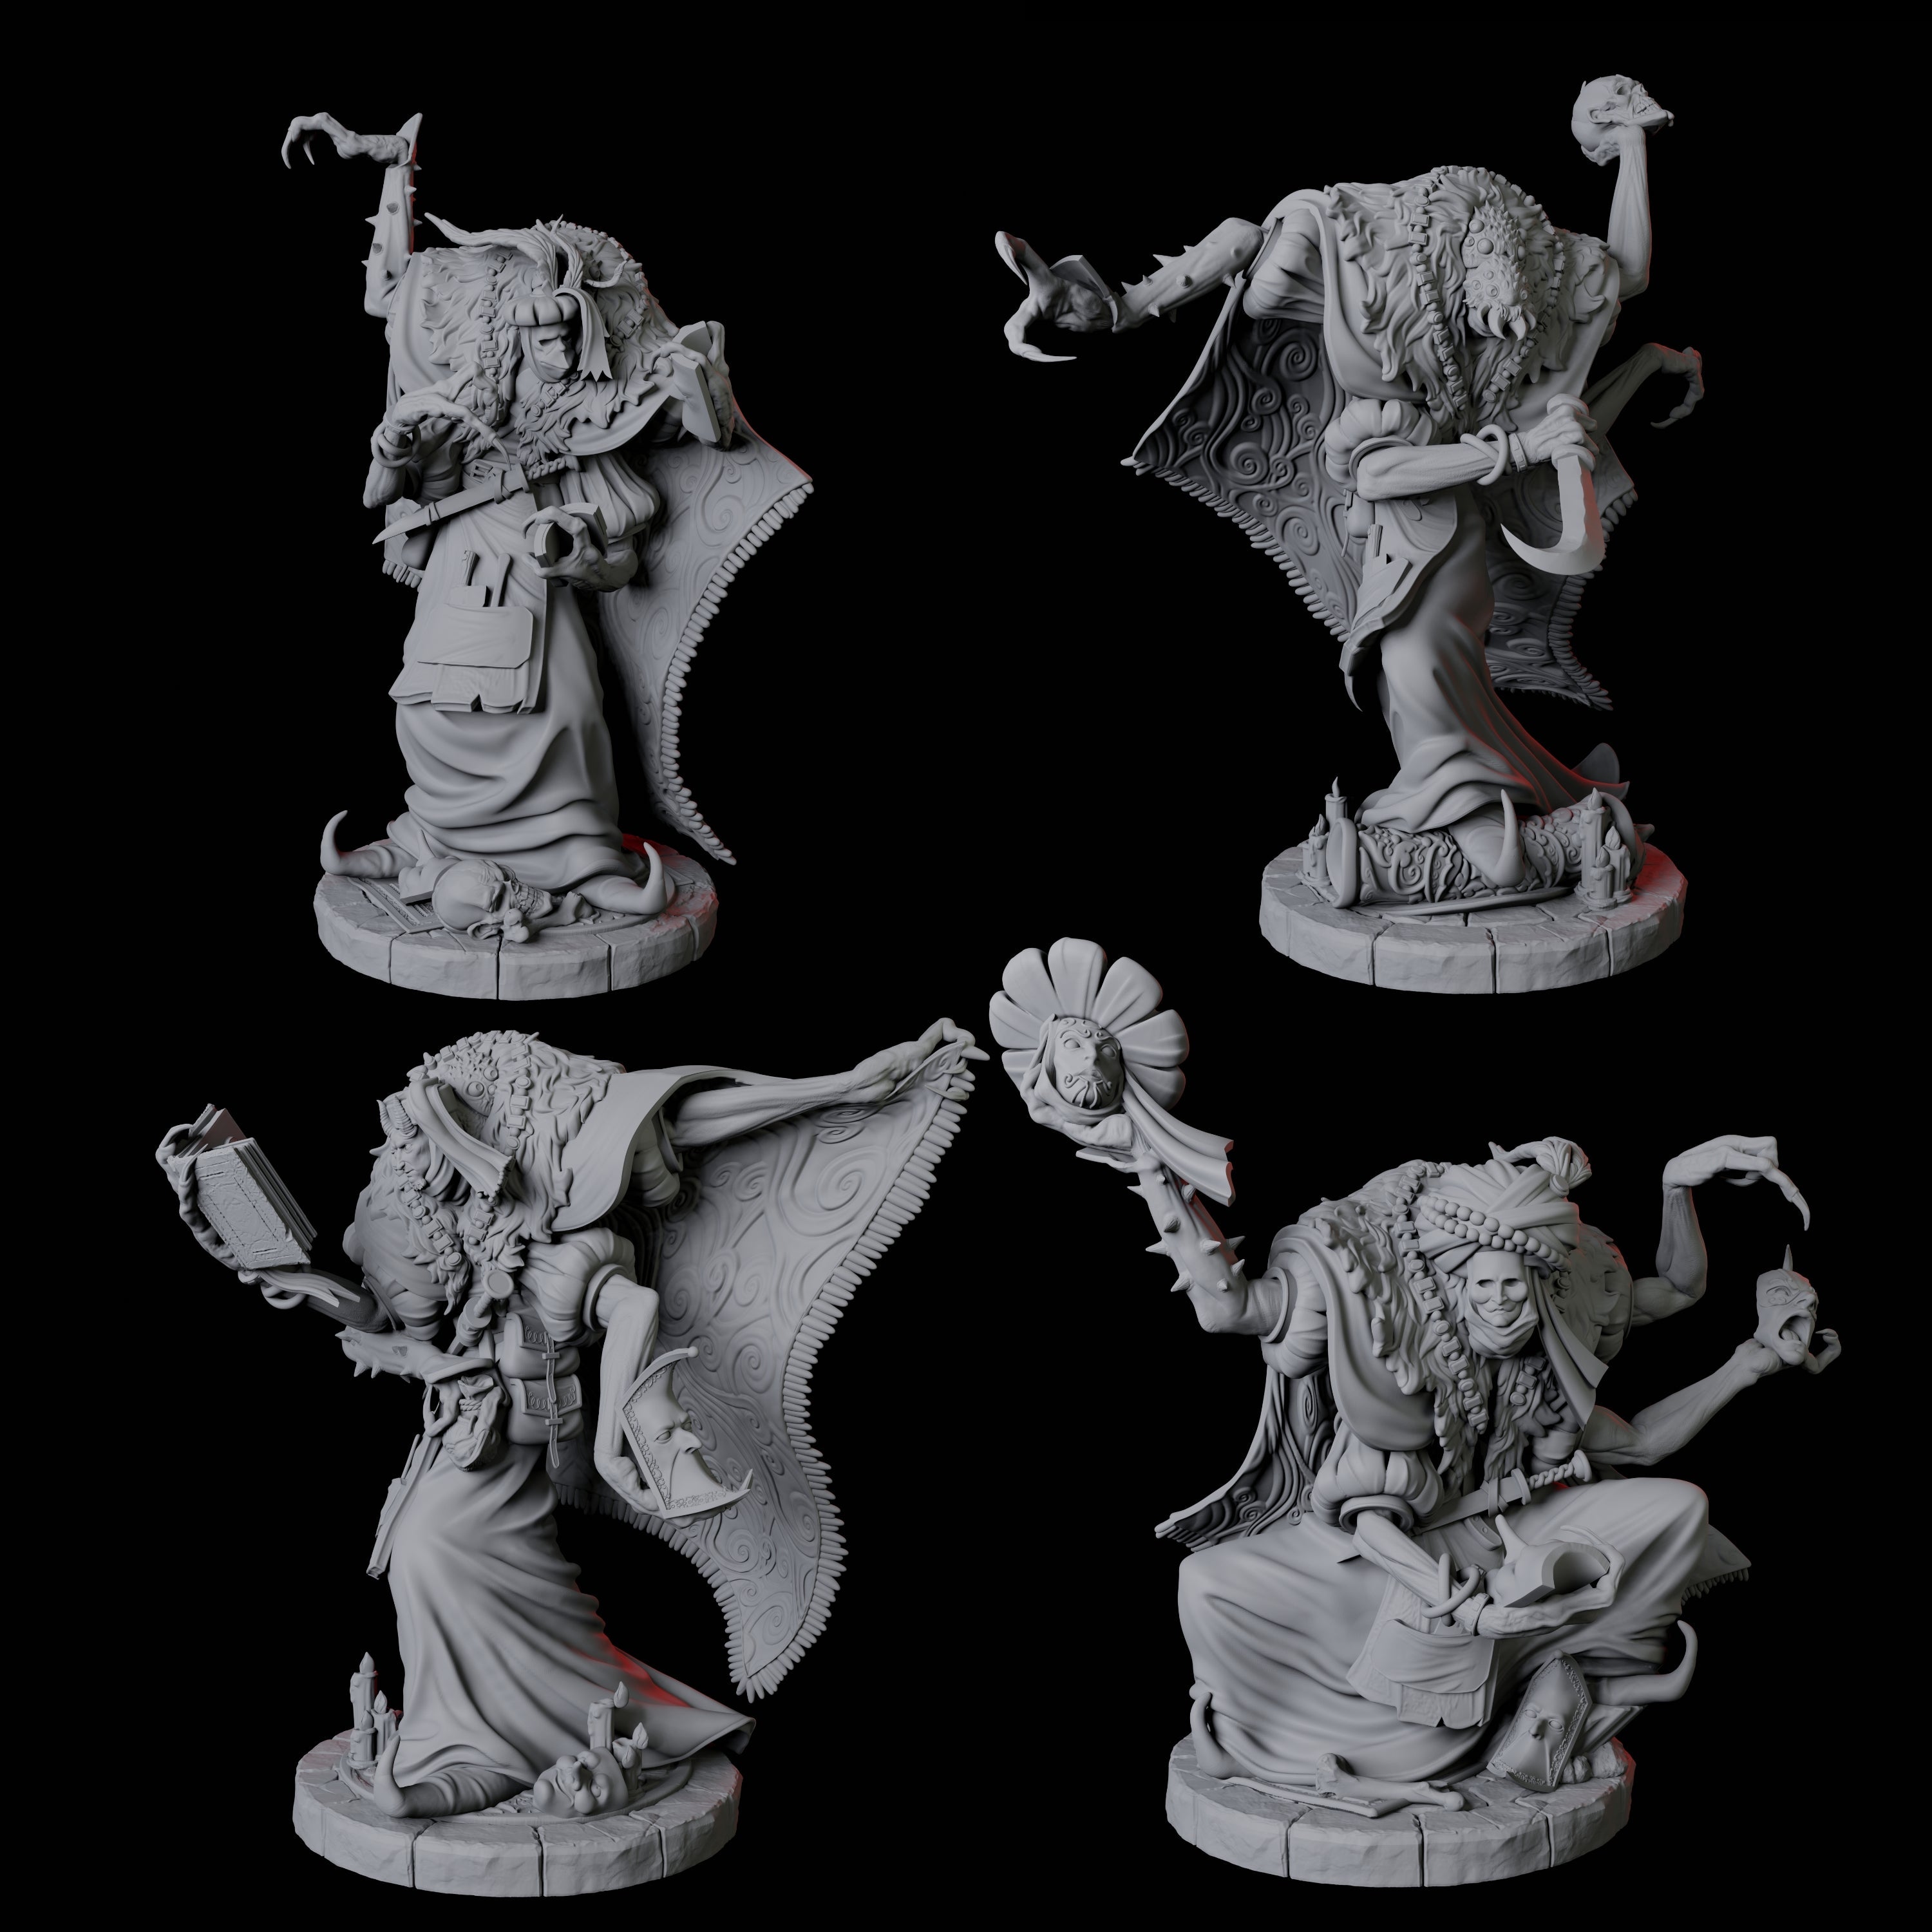 Four Disguised Quelaunts Miniature for Dungeons and Dragons, Pathfinder or other TTRPGs